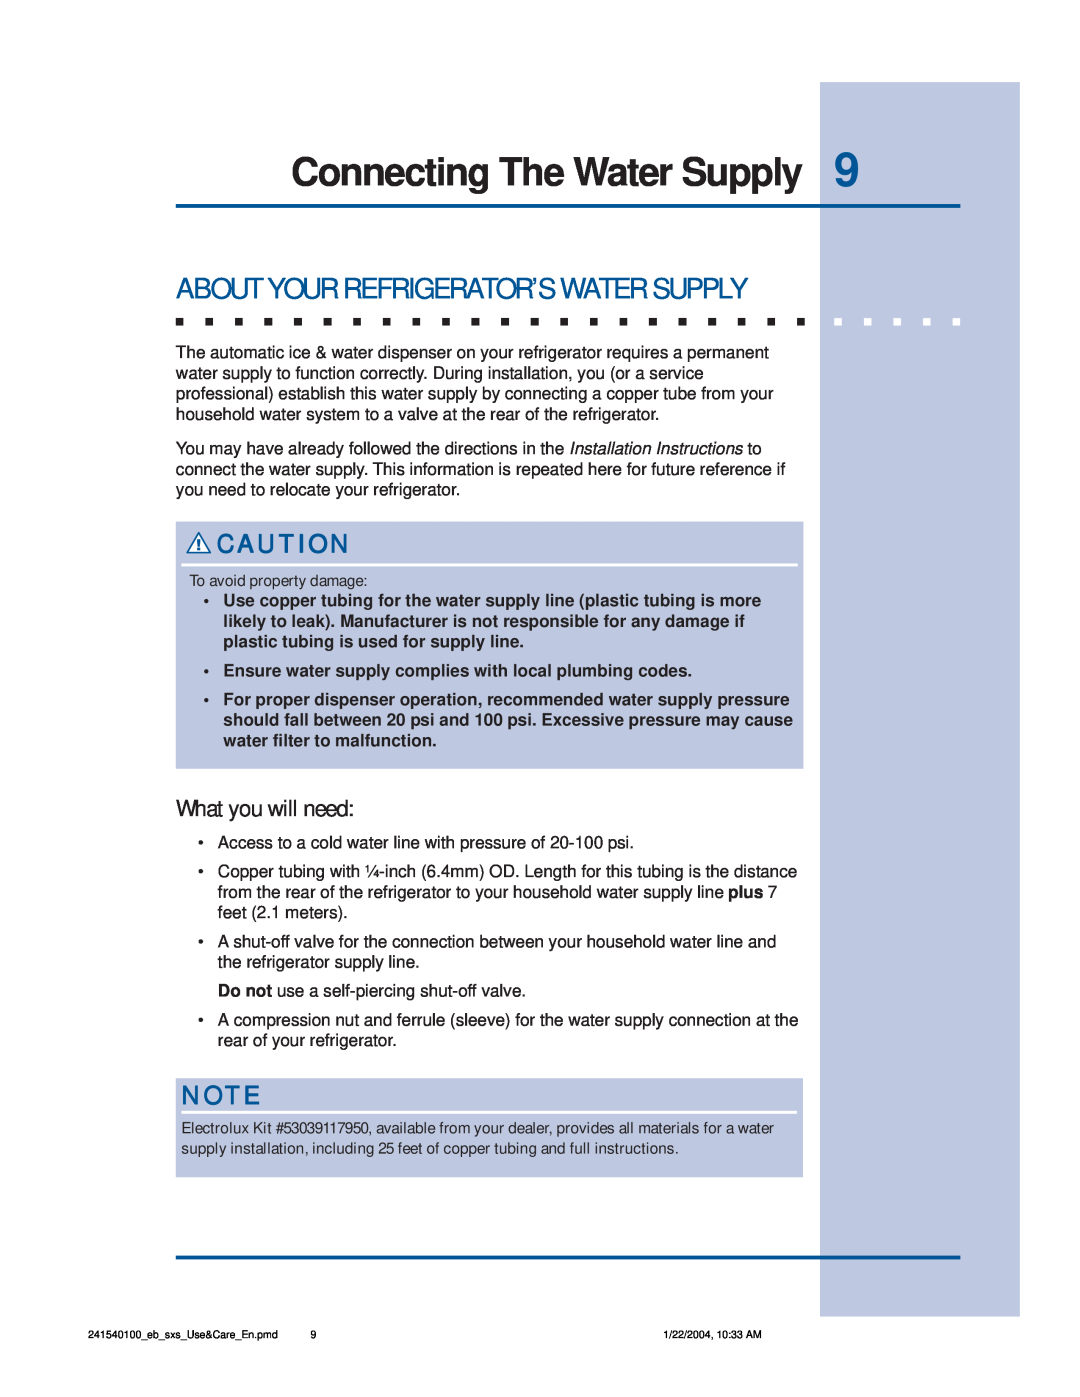 Frigidaire 241540100 (1203) manual Connecting The Water Supply, About Your Refrigerator’S Water Supply, What you will need 